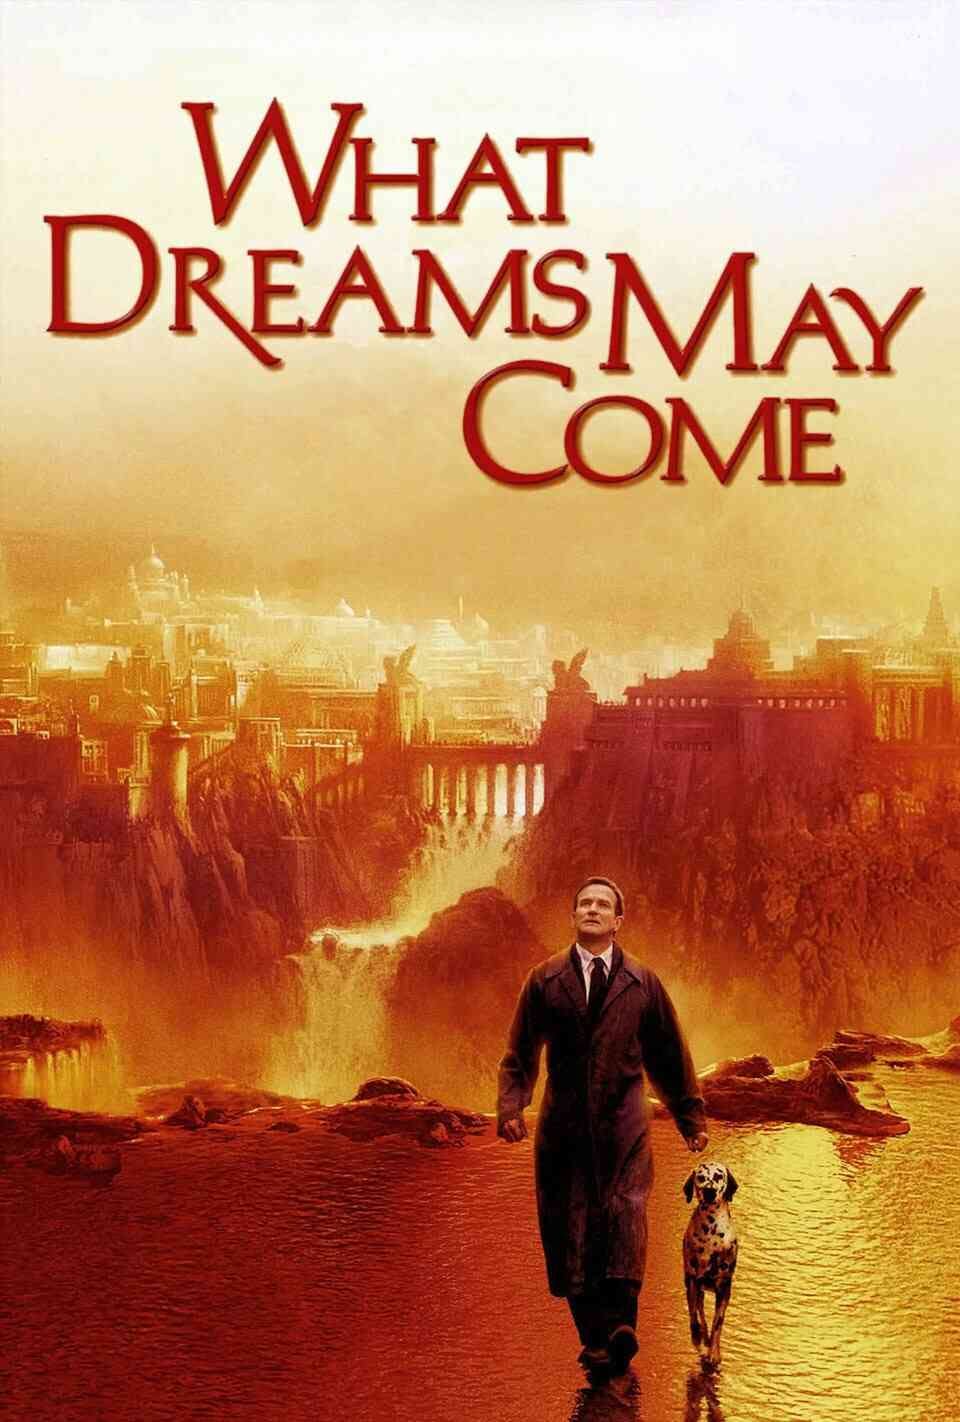 Read What Dreams May Come screenplay (poster)